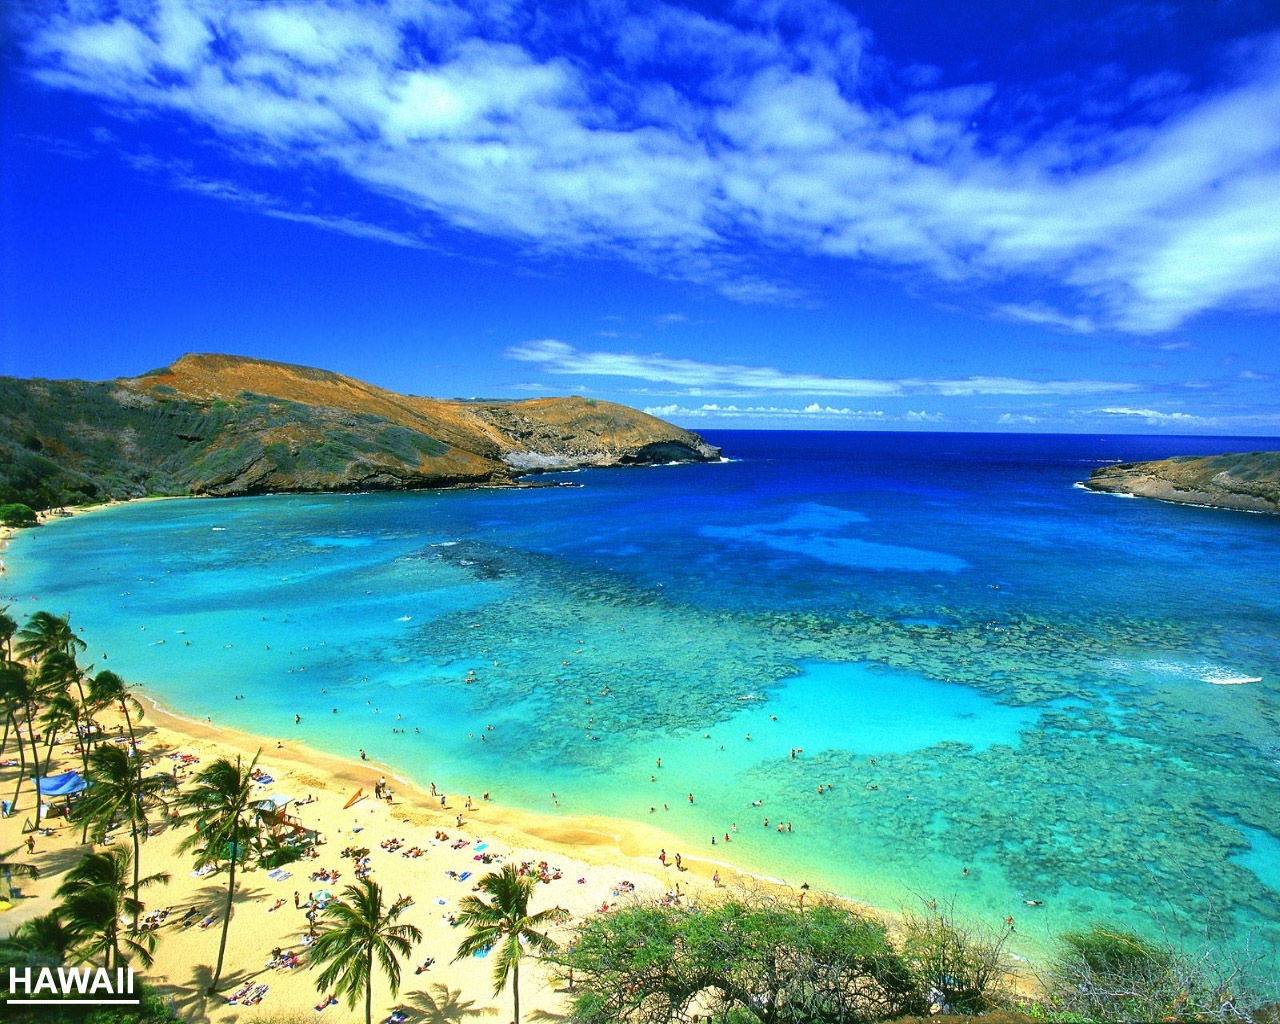 Hawaii Wallpaper HD Background Image Pictures